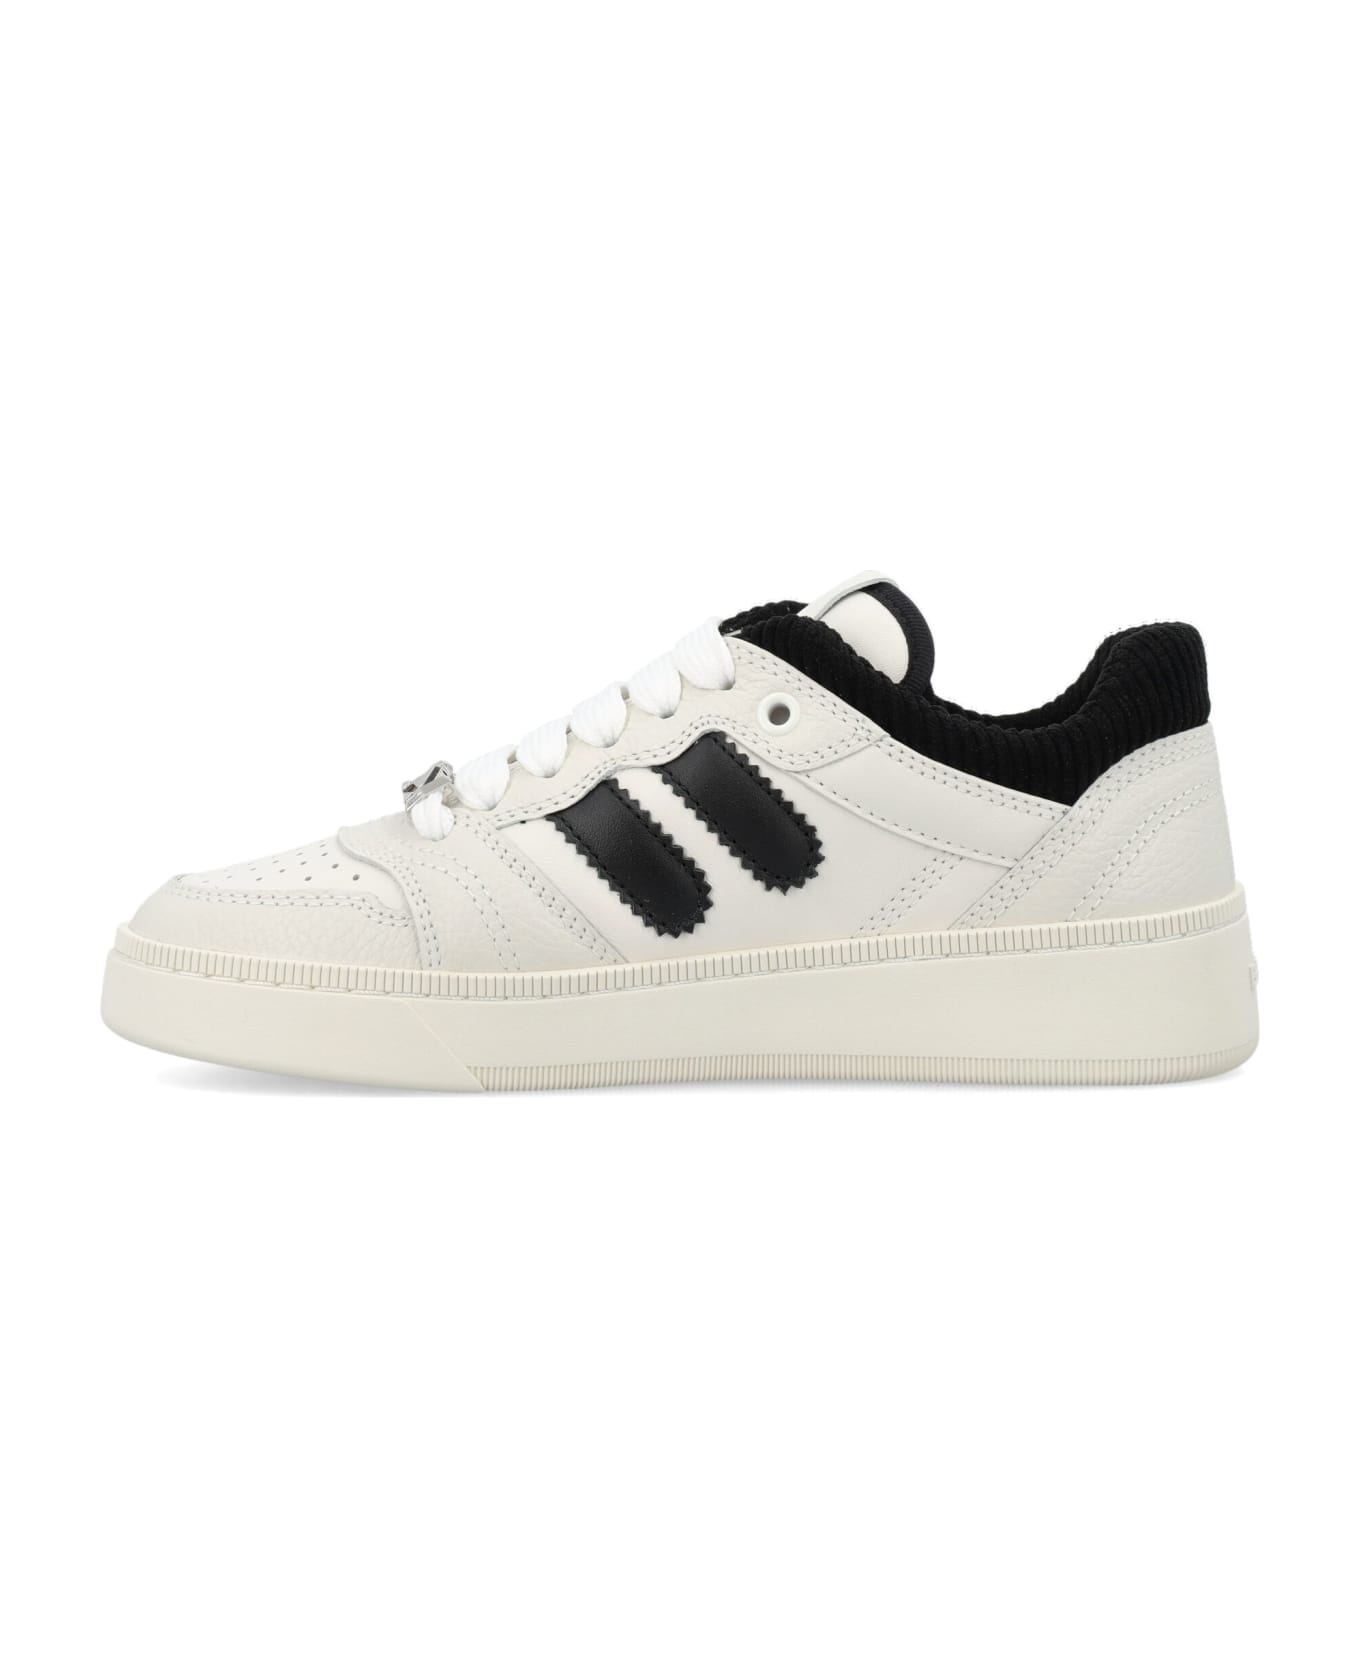 Bally Royalty-w Leather Sneakers - WHITE/BLACK